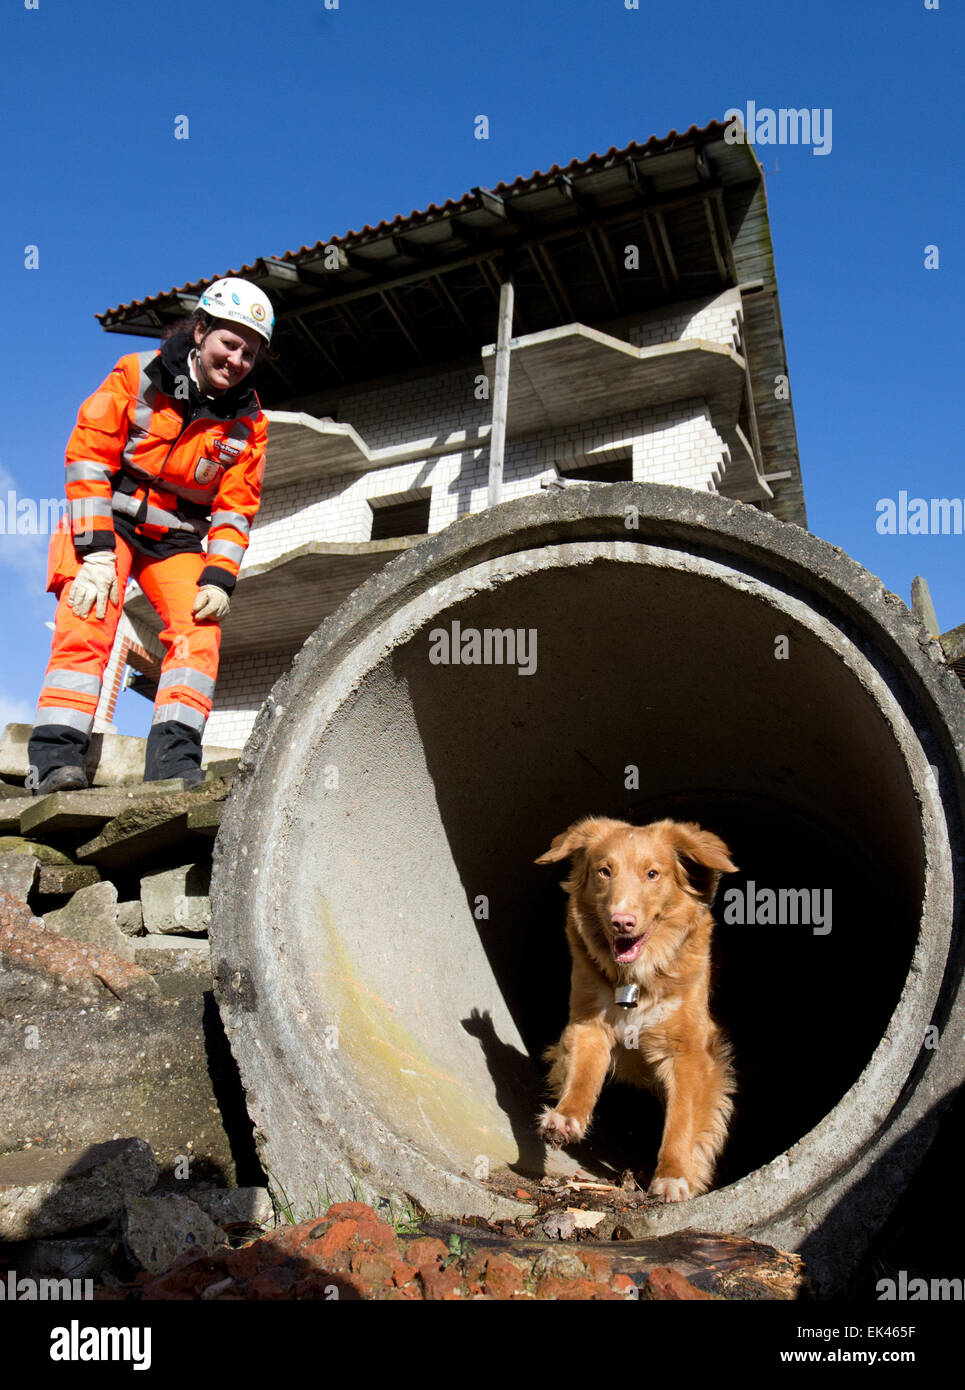 Rendsburg, Germany. 30th Mar, 2015. Rescue dog handler Kirstin Petersen-Pieper is practicing with rescue dog Chiuvana on the compound of the youth fire brigade centre in Rendsburg, Germany, 30 March 2015. The members of the rescue dog squad Holstein, a regional chapter of the Bundesverband Rettungshunde (BRH, Federal Association of Rescue Dogs), hold routine drills in the ruins to track down buried or missing people. Photo: Christian Charisius/dpa/Alamy Live News Stock Photo